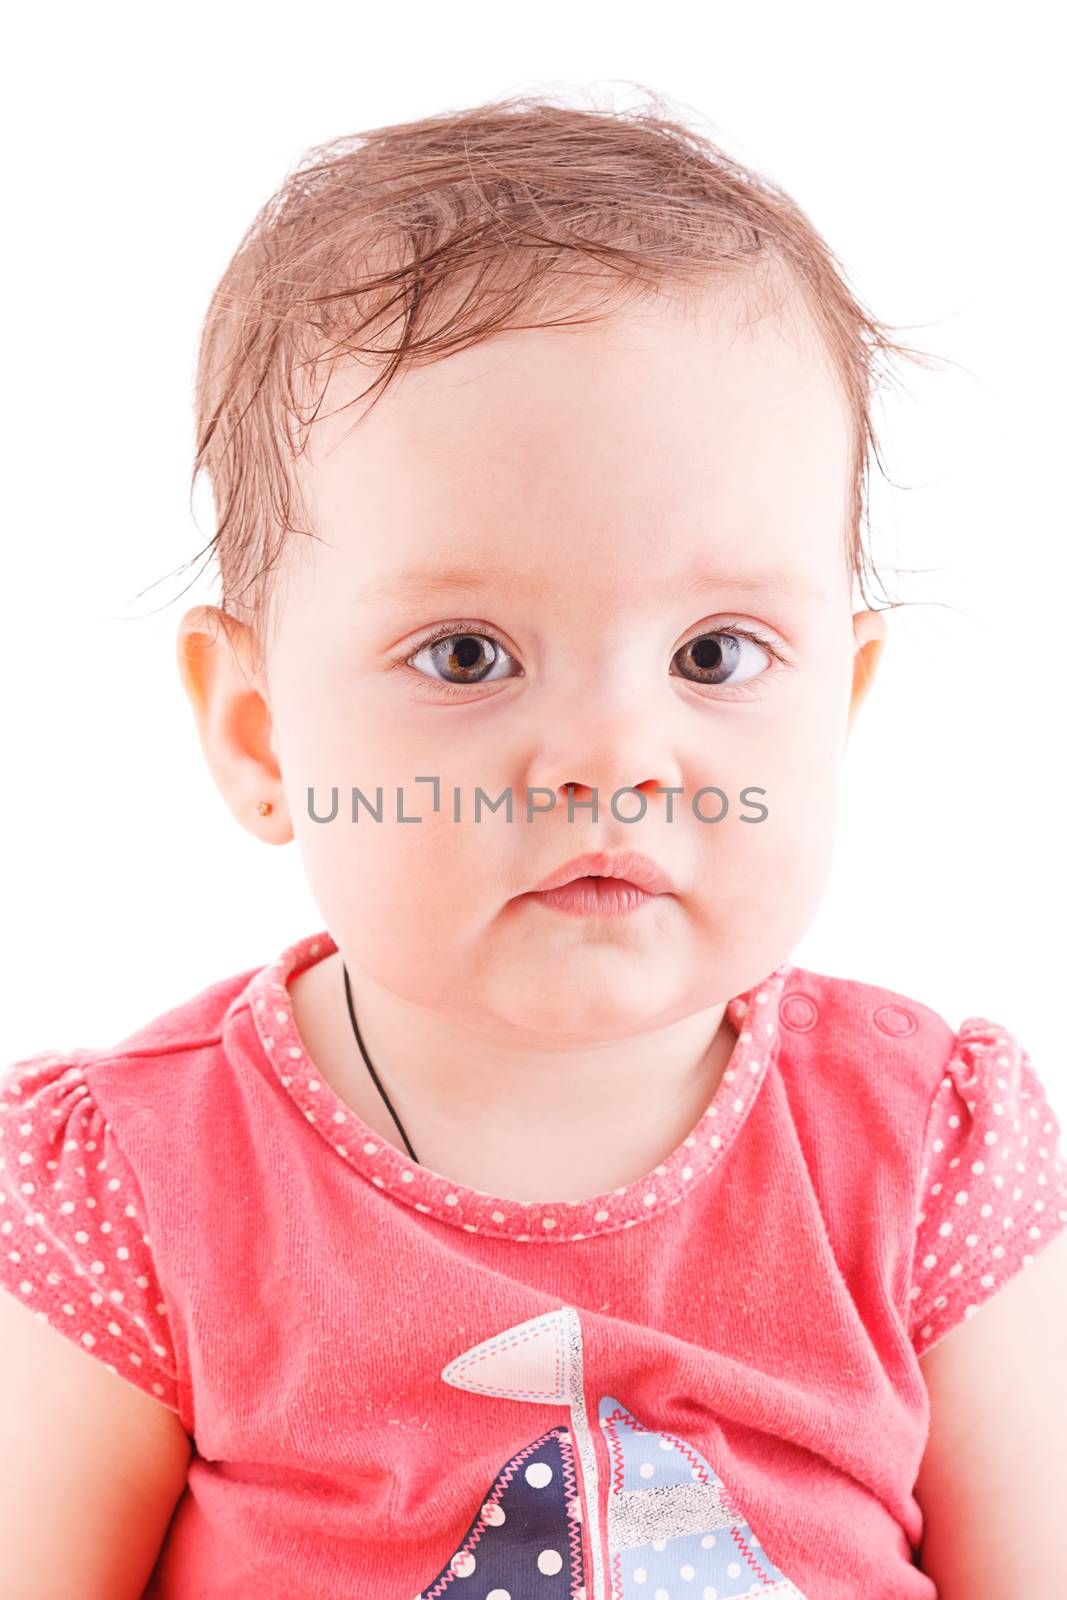 The girl is one year in dress sitting on a white background.